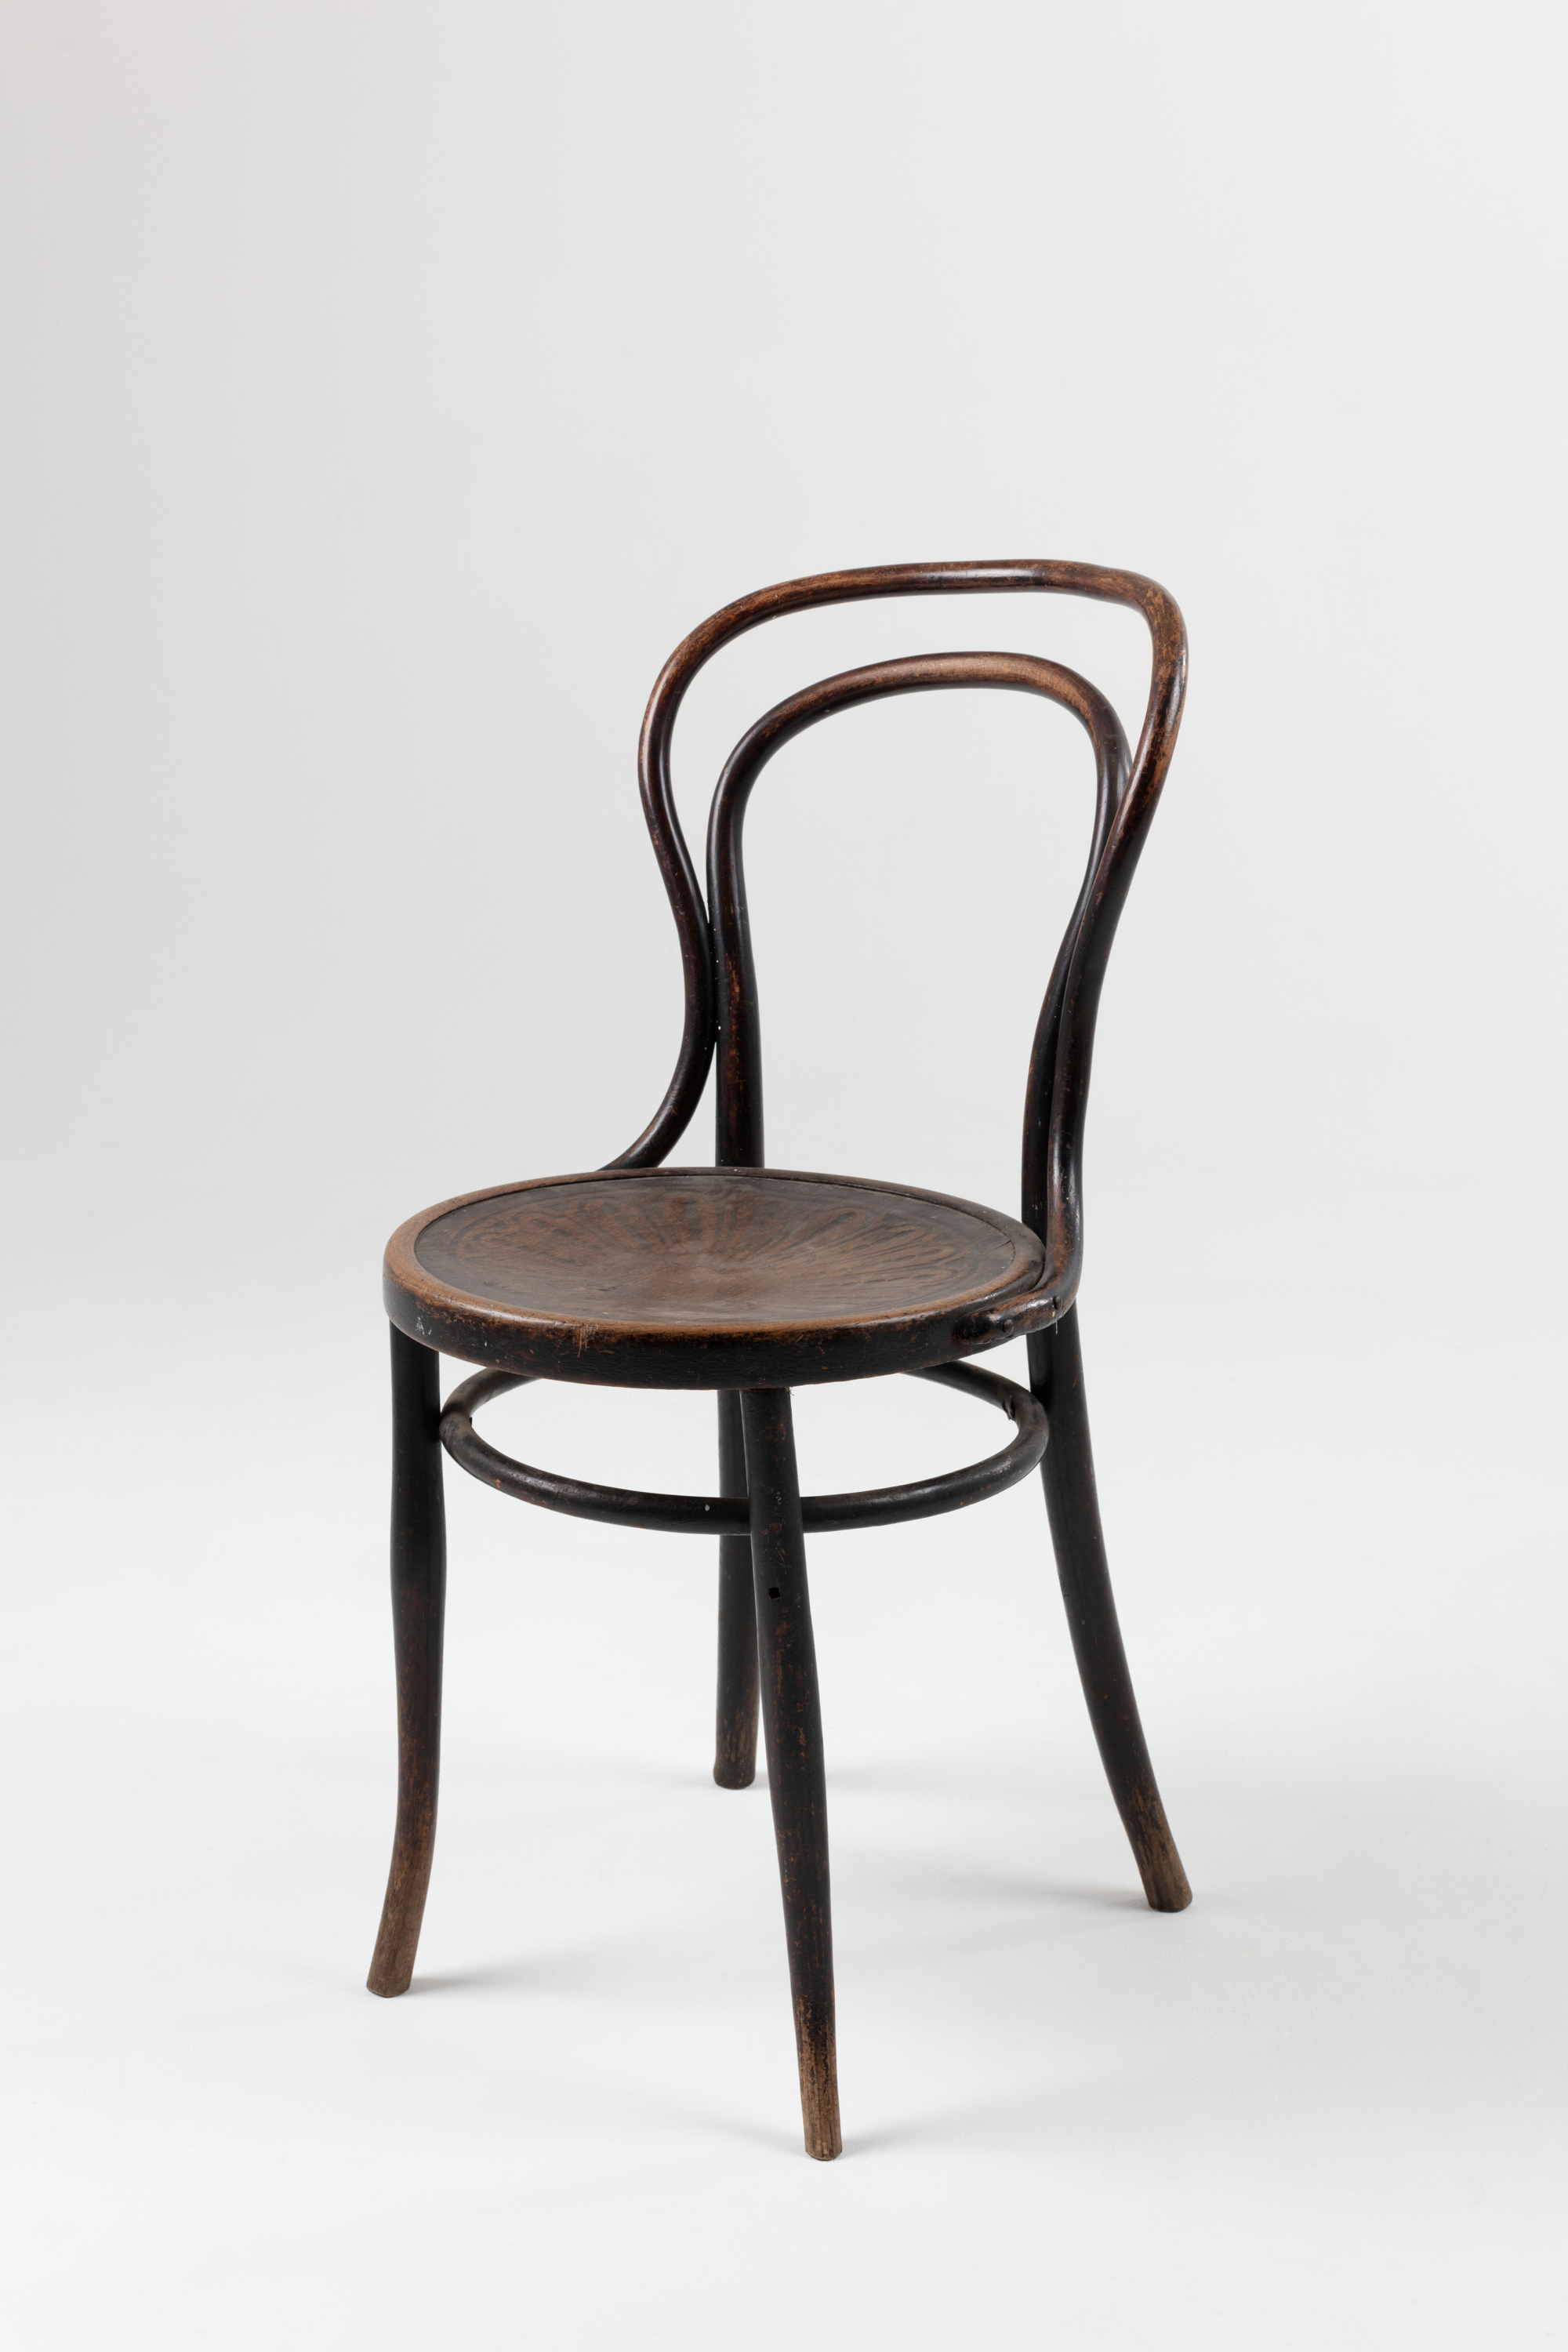 Chair used at Sydney Observatory